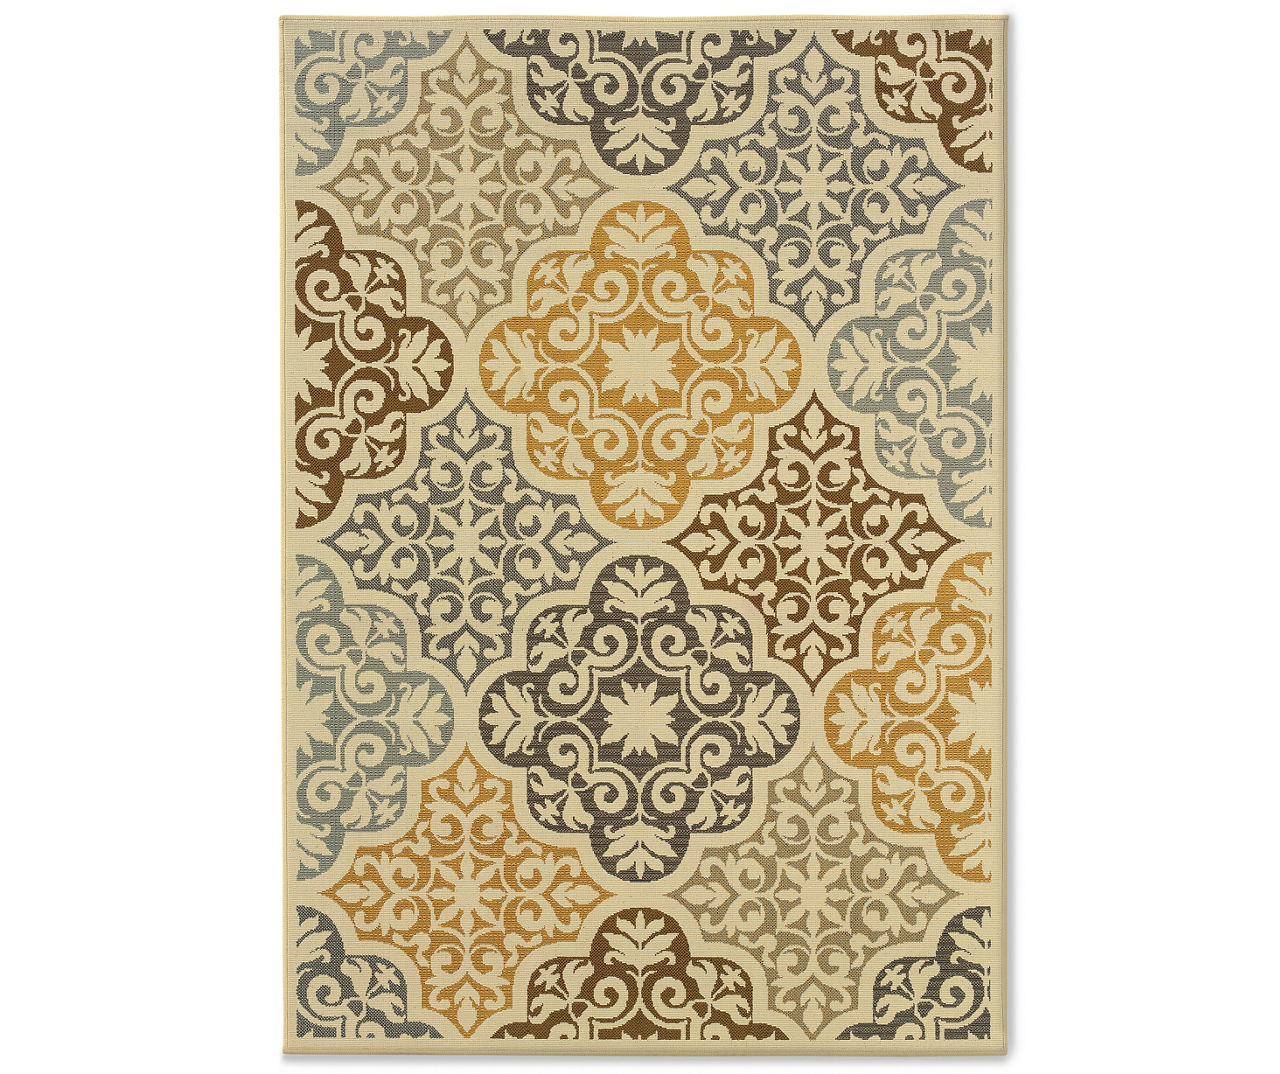 Gaines Warm White Outdoor Area Rug, (3'7" x 5'6")